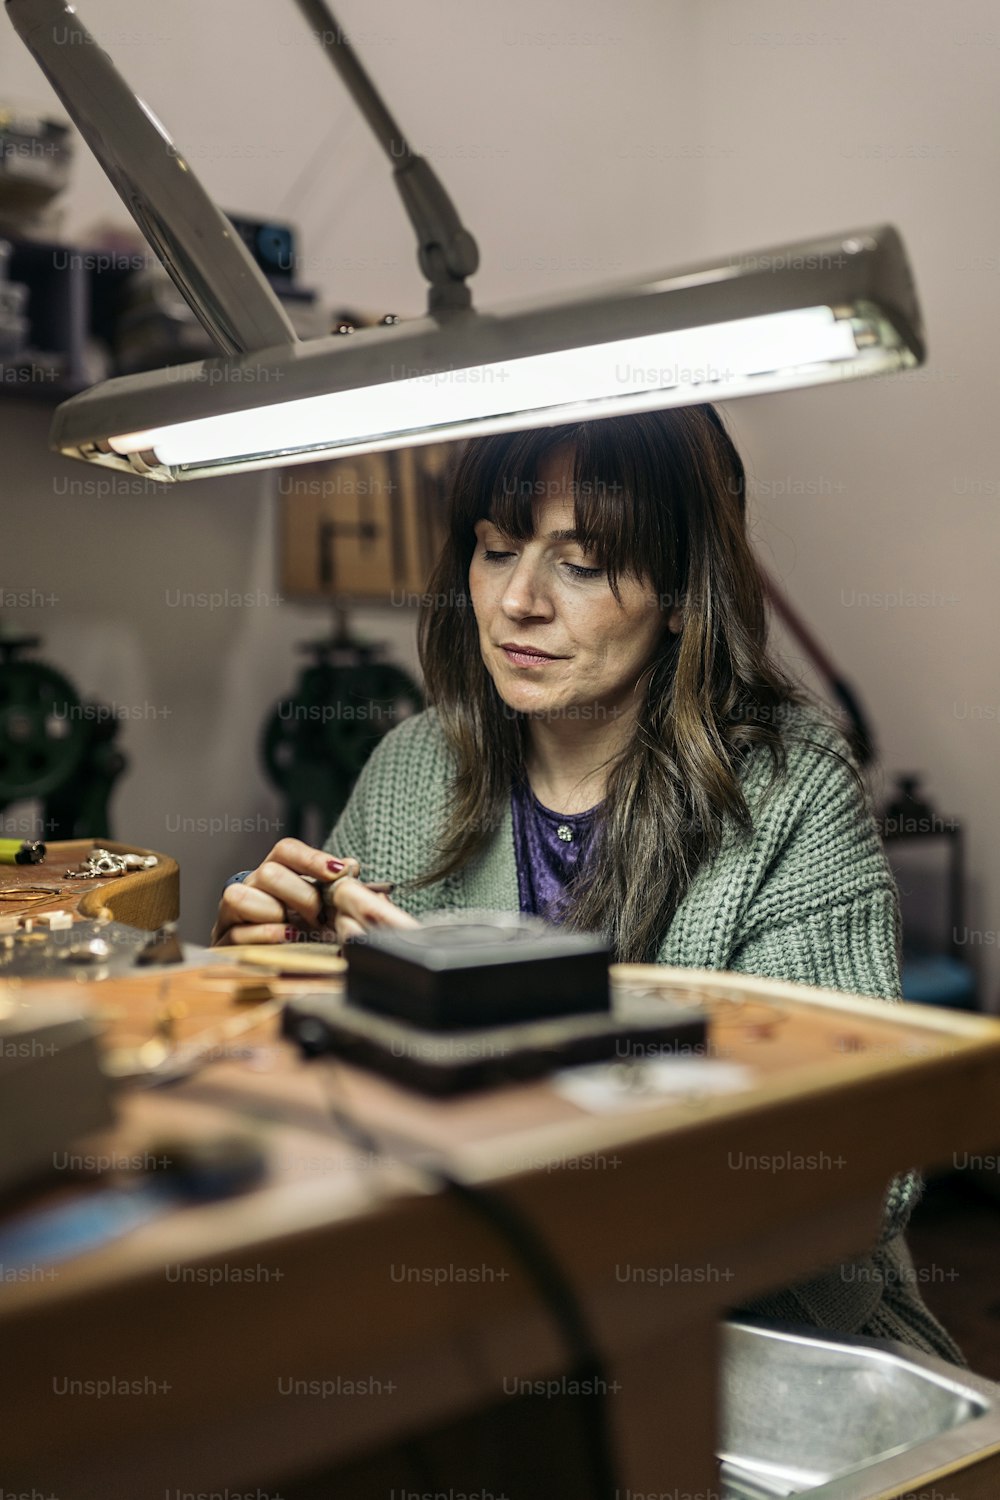 Stock photo of concentrated woman working in jewelry workshop.